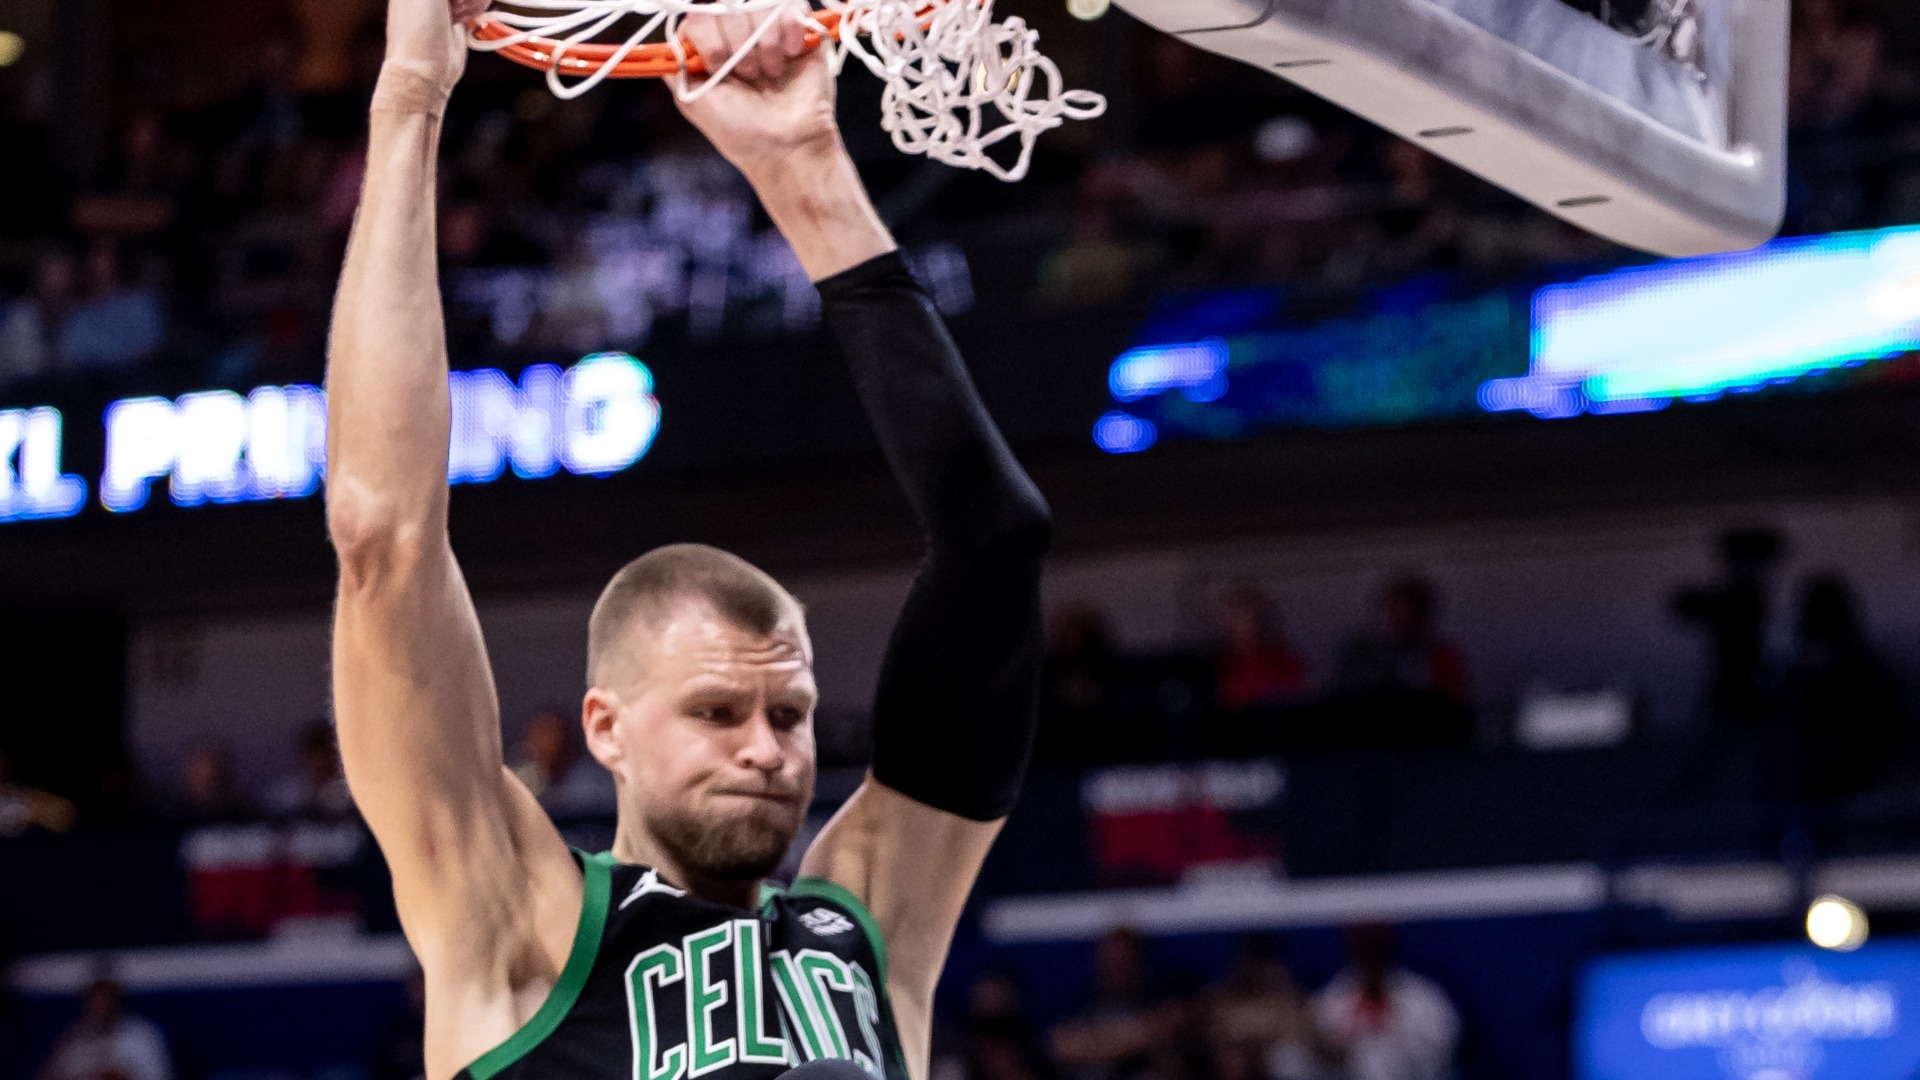 Kristaps Porzingis, Celtics ‘Hit Another Gear’ To Snap Two-Game
Skid